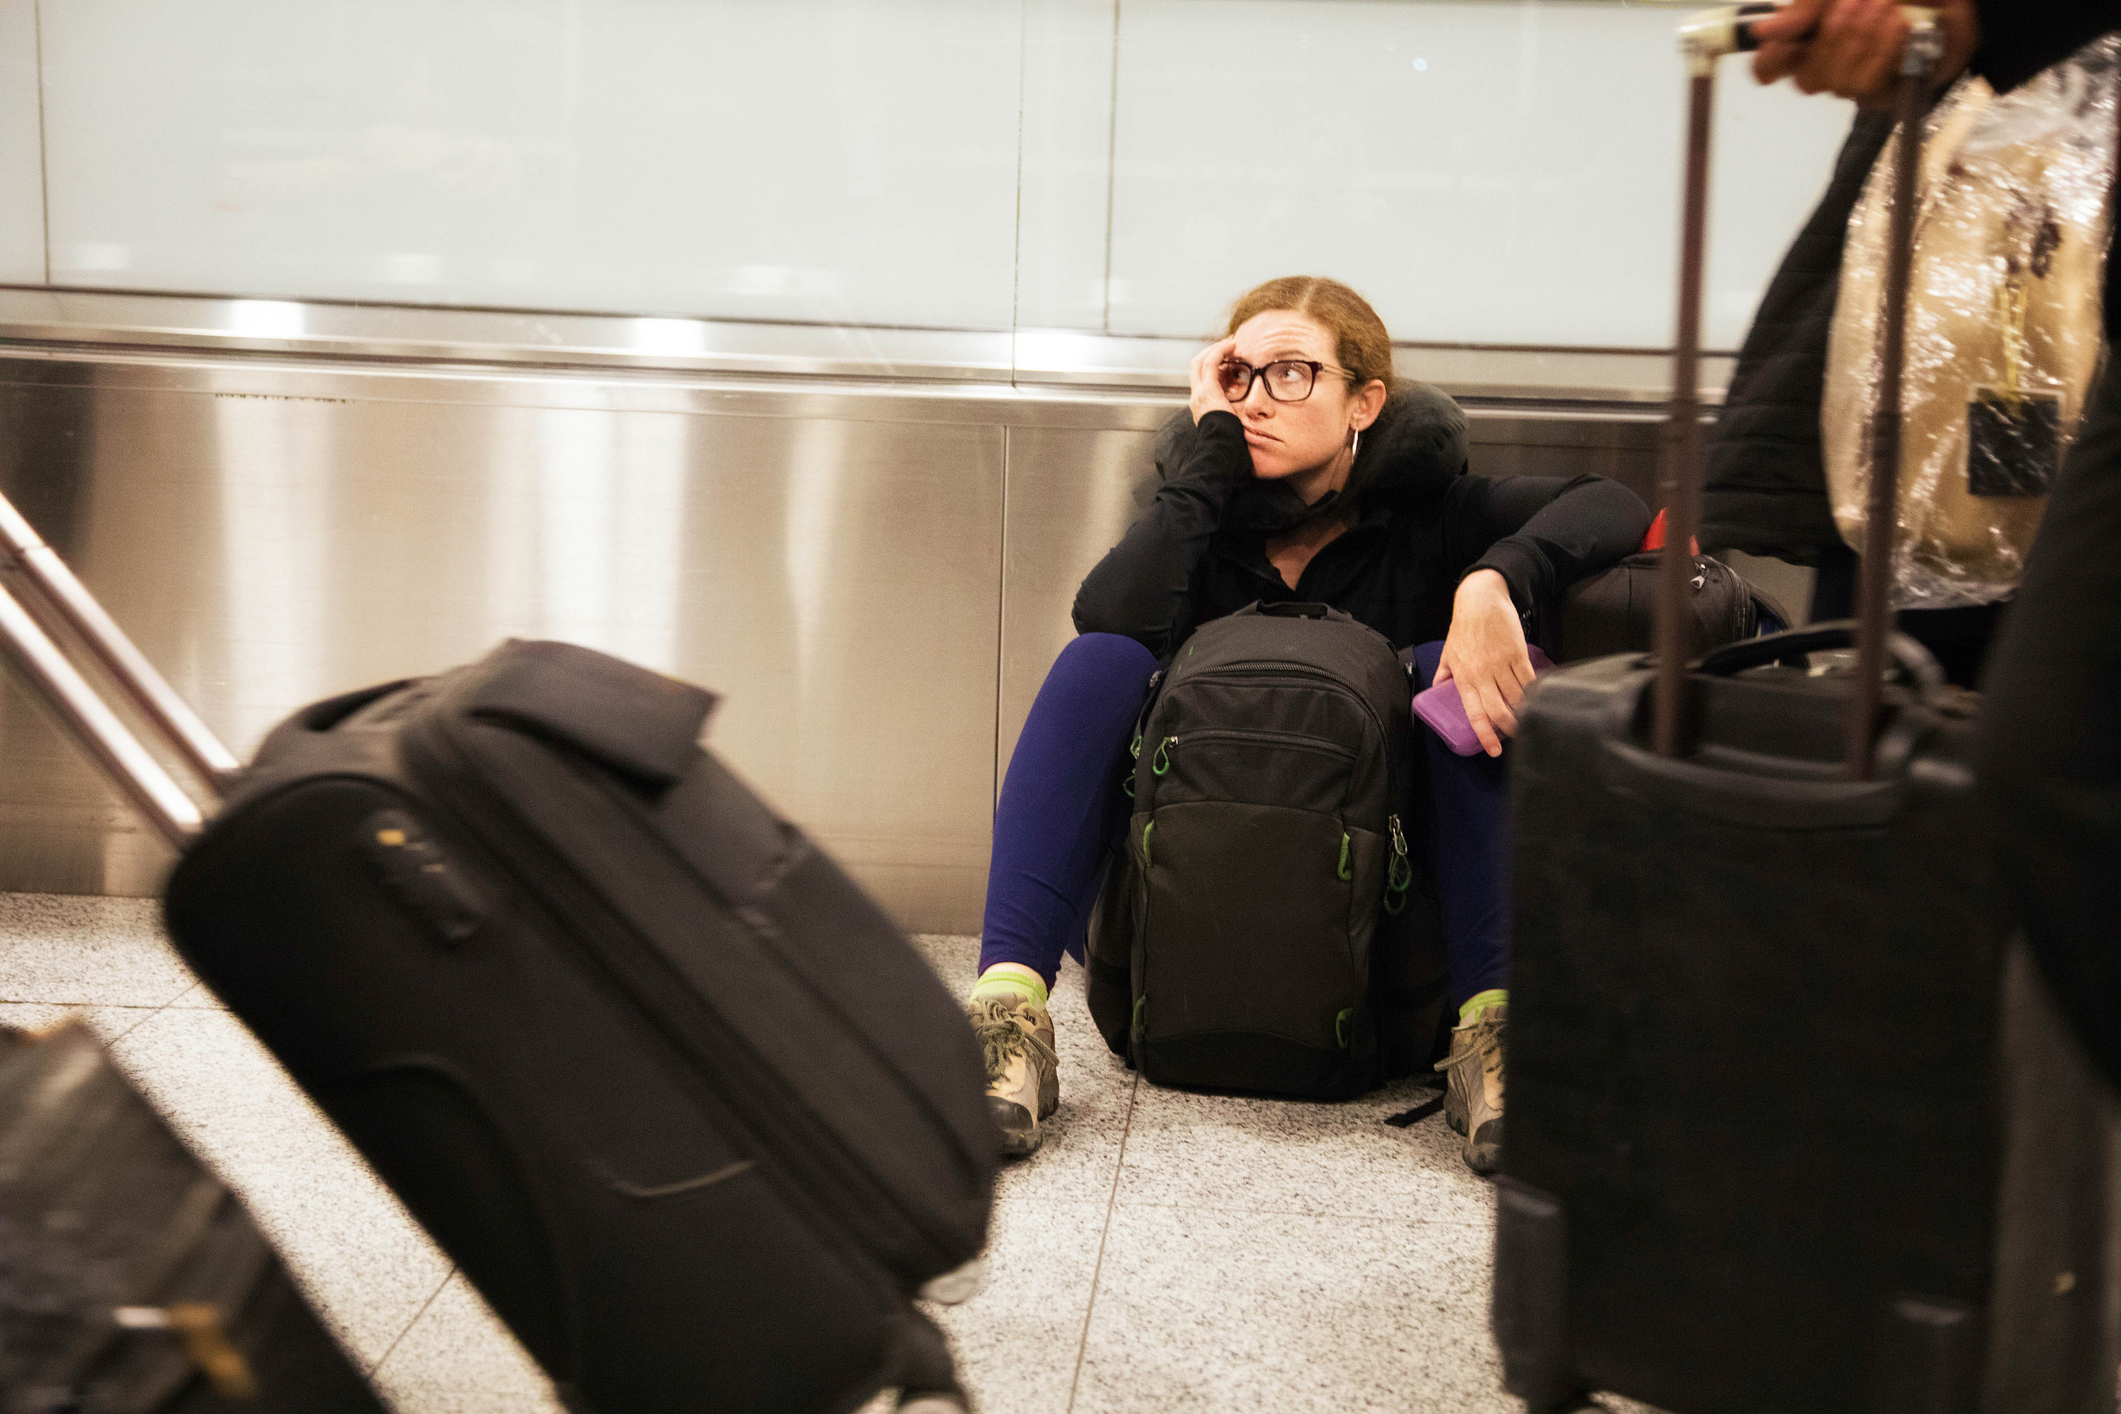 woman stranded at an airport-call your consolidator